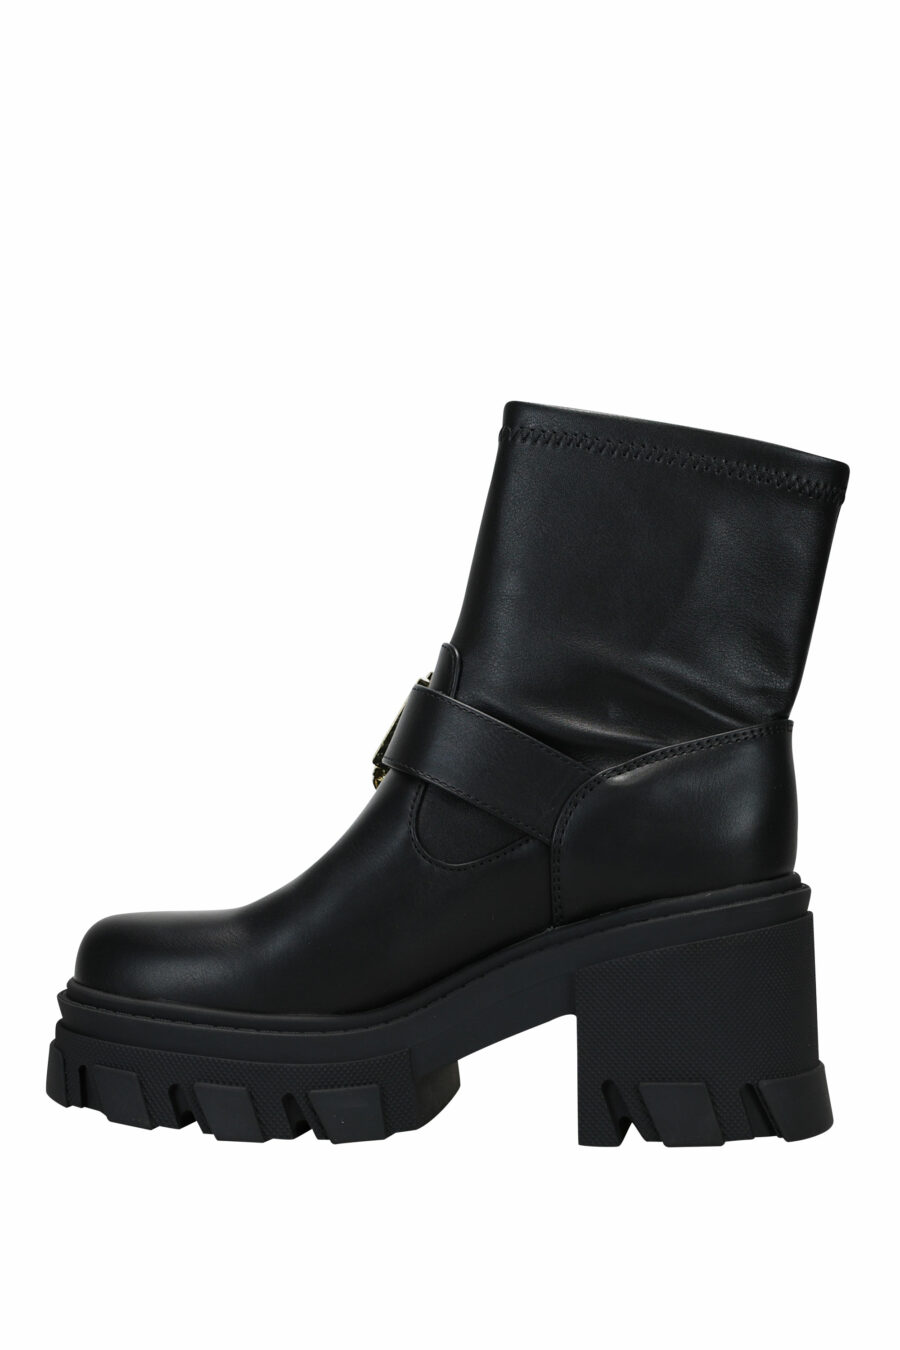 Black ankle boots with baroque buckle and platform - 8052019461084 2